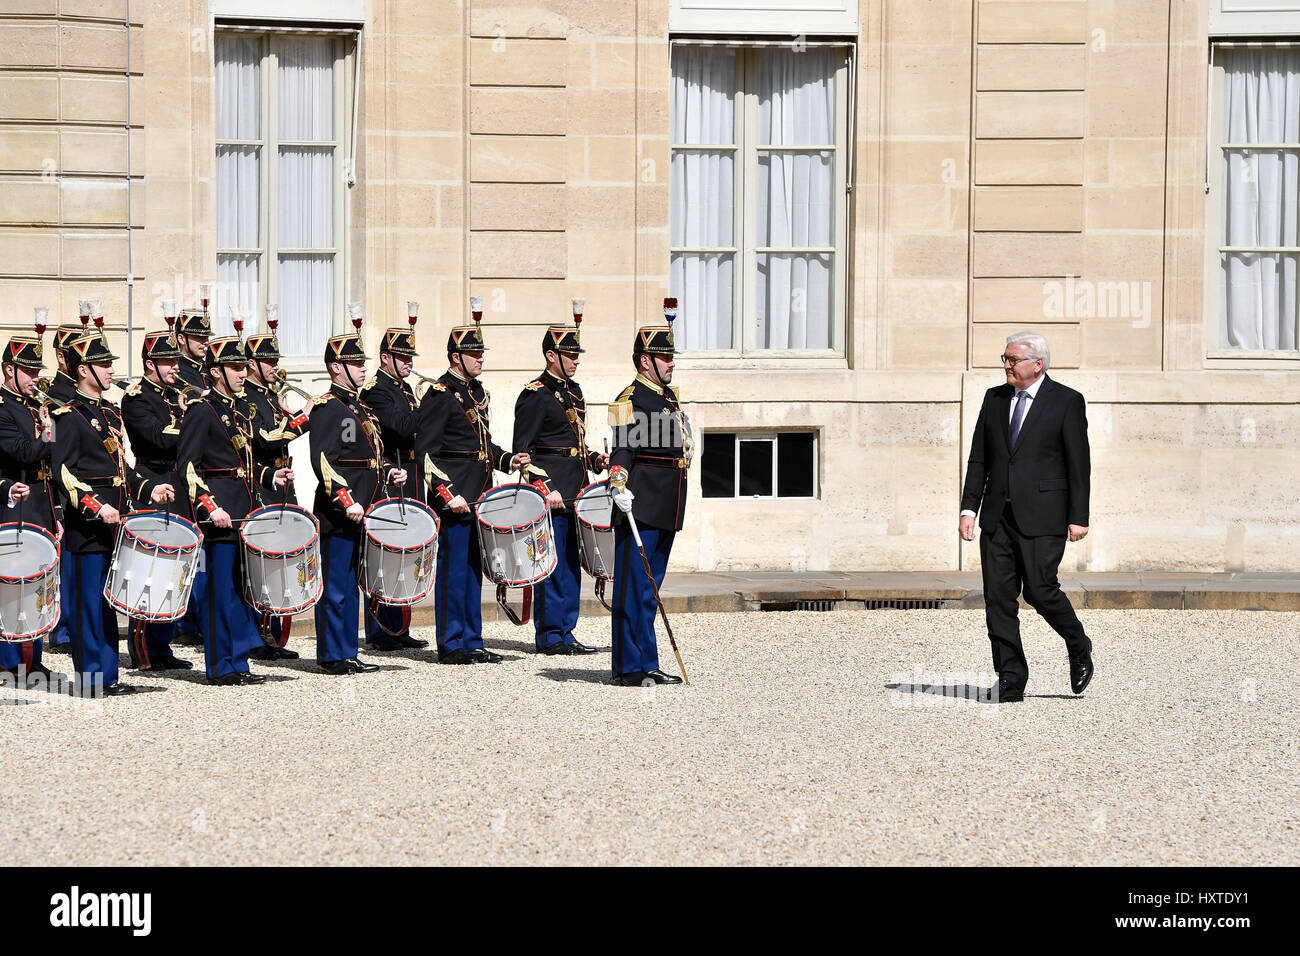 Paris. 30th Mar, 2017. German President Frank-Walter Steinmeier inspects the guard of honor at the Elysee Palace in Paris, France on March 30, 2017. Credit: Chen Yichen/Xinhua/Alamy Live News Stock Photo